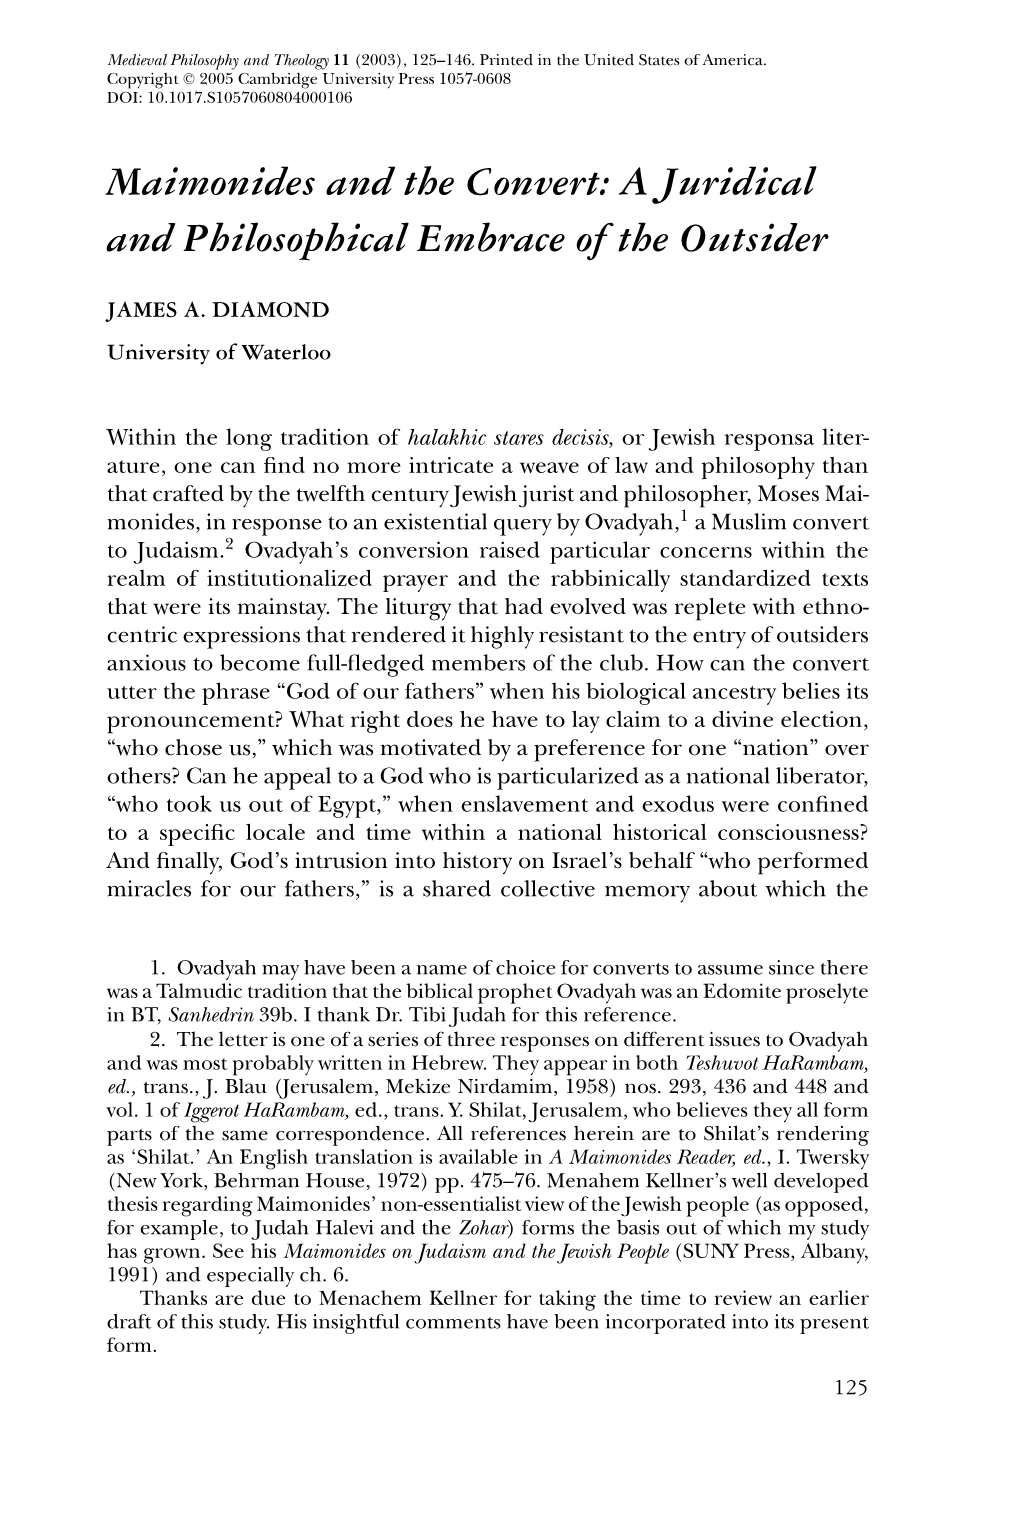 Maimonides and the Convert: a Juridical and Philosophical Embrace of the Outsider